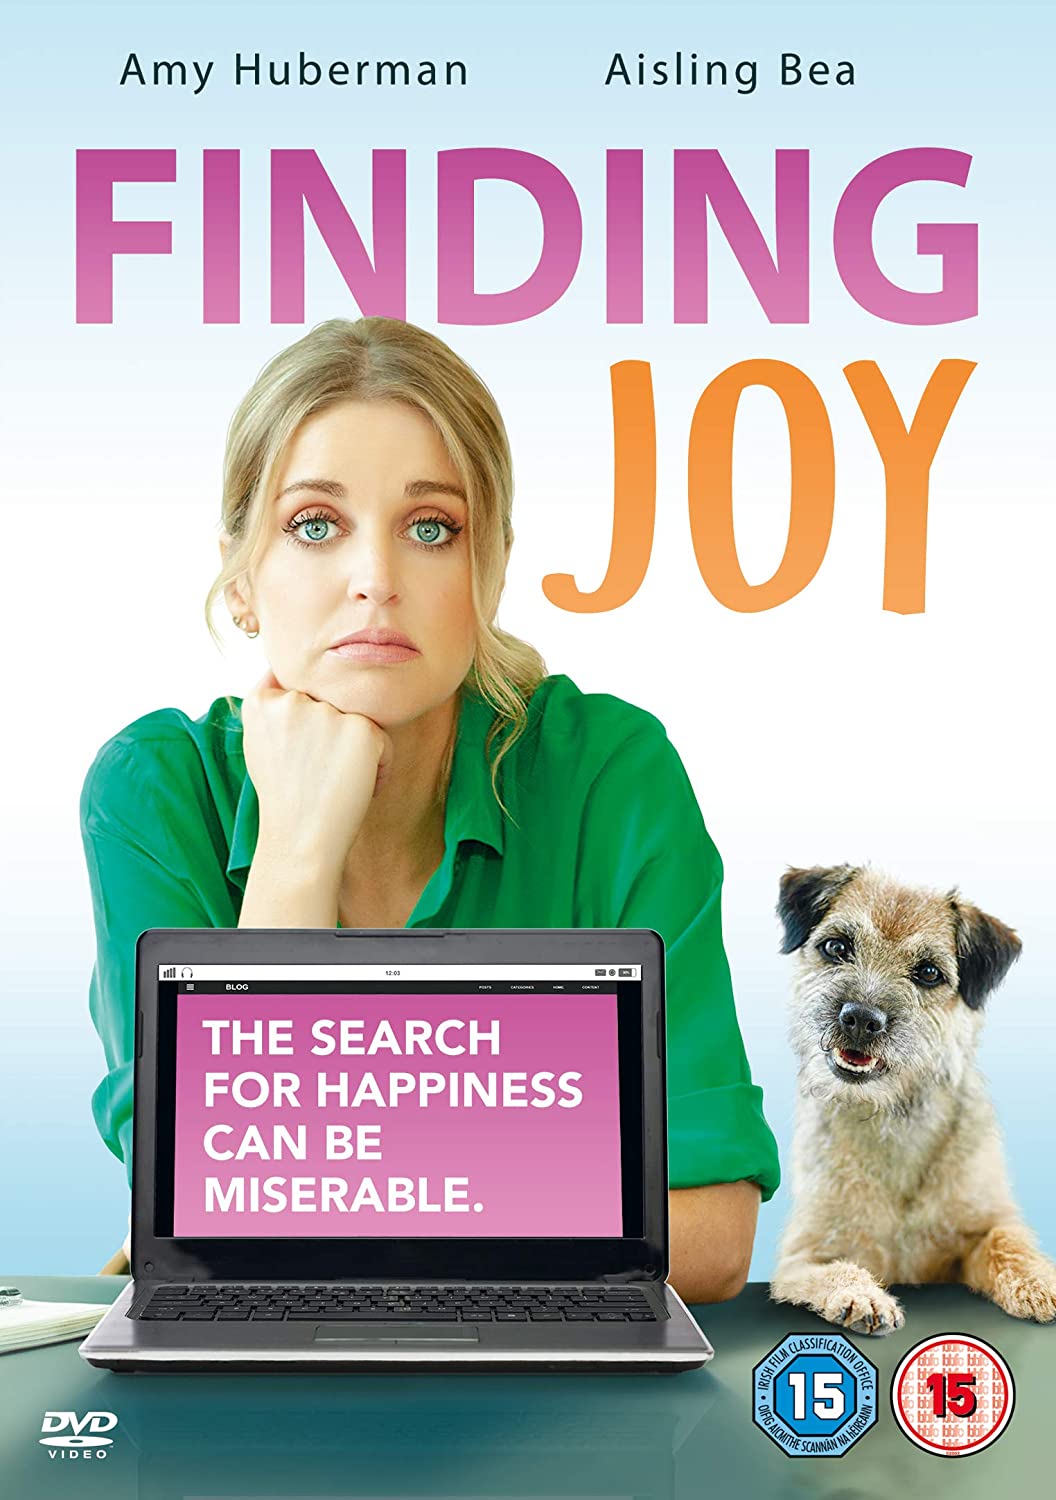 boom competitions - win Finding Joy on DVD